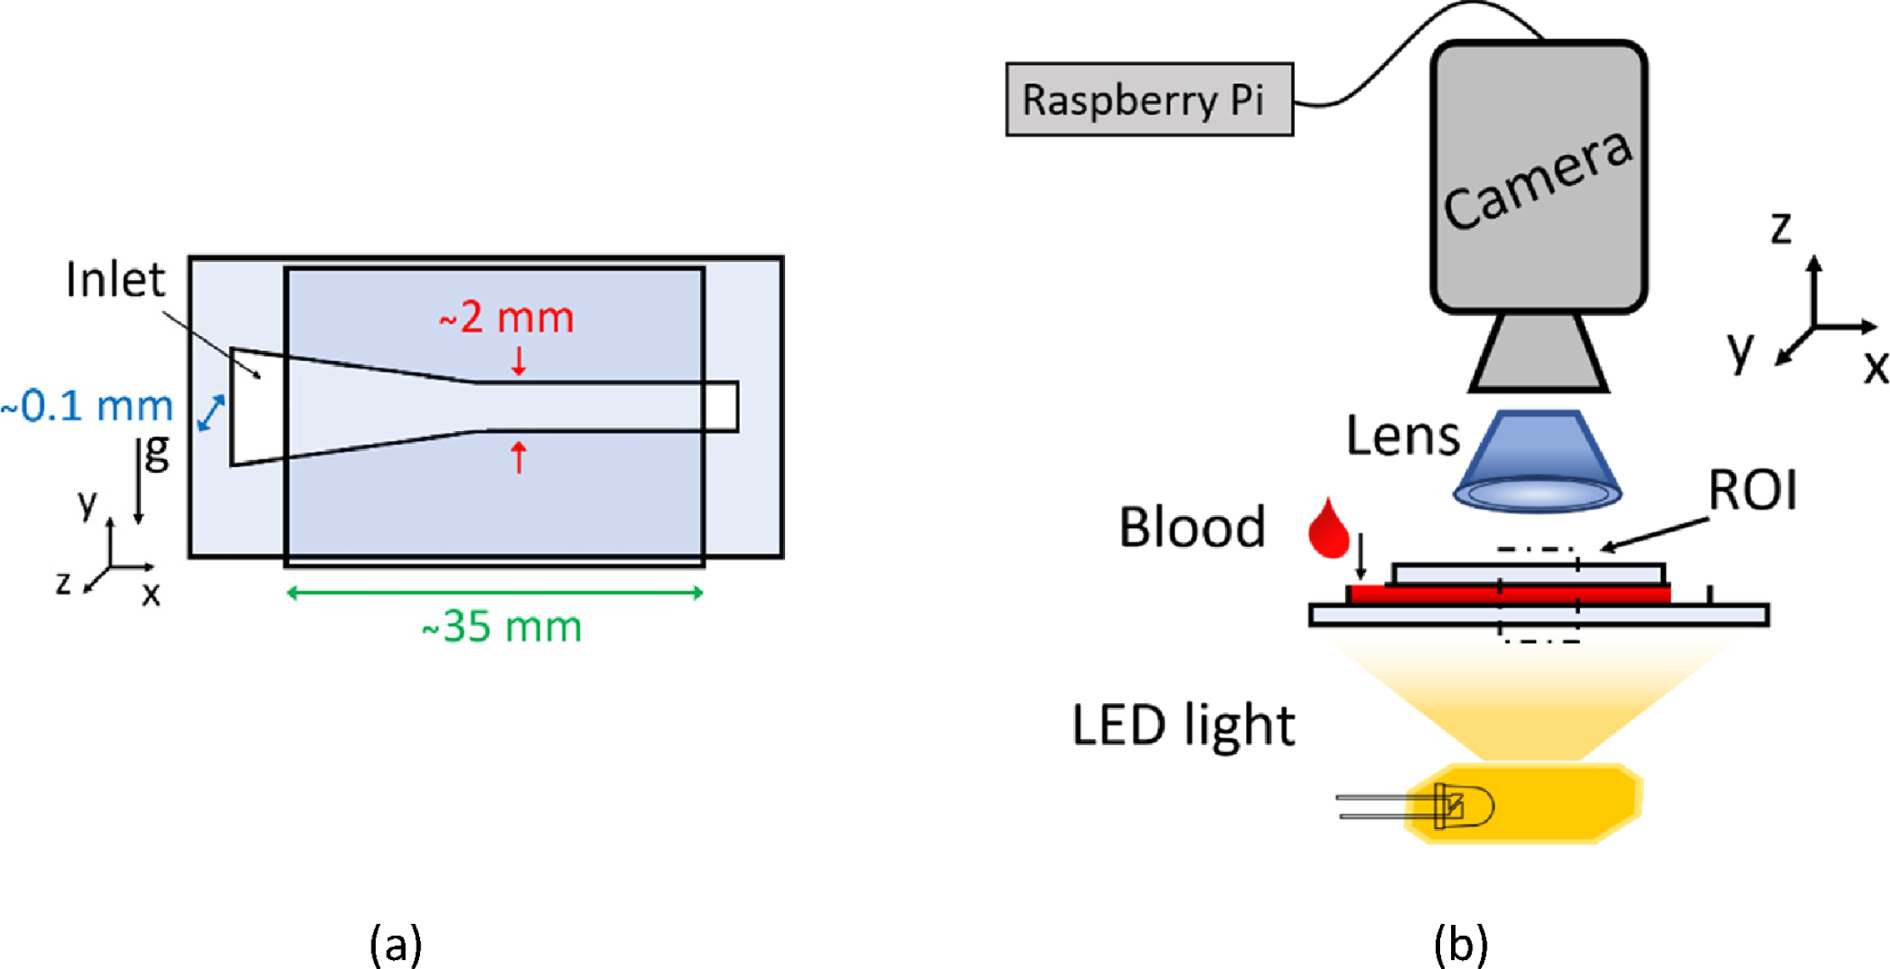 (a) Schematic of the microfluidic chip. The erythrocyte sedimentation is captured along the y-axis (direction of gravity). (b) Schematic of the experimental set-up for monitoring and measuring ESR. The flow of blood through the microfluidic chip is surface tension driven.